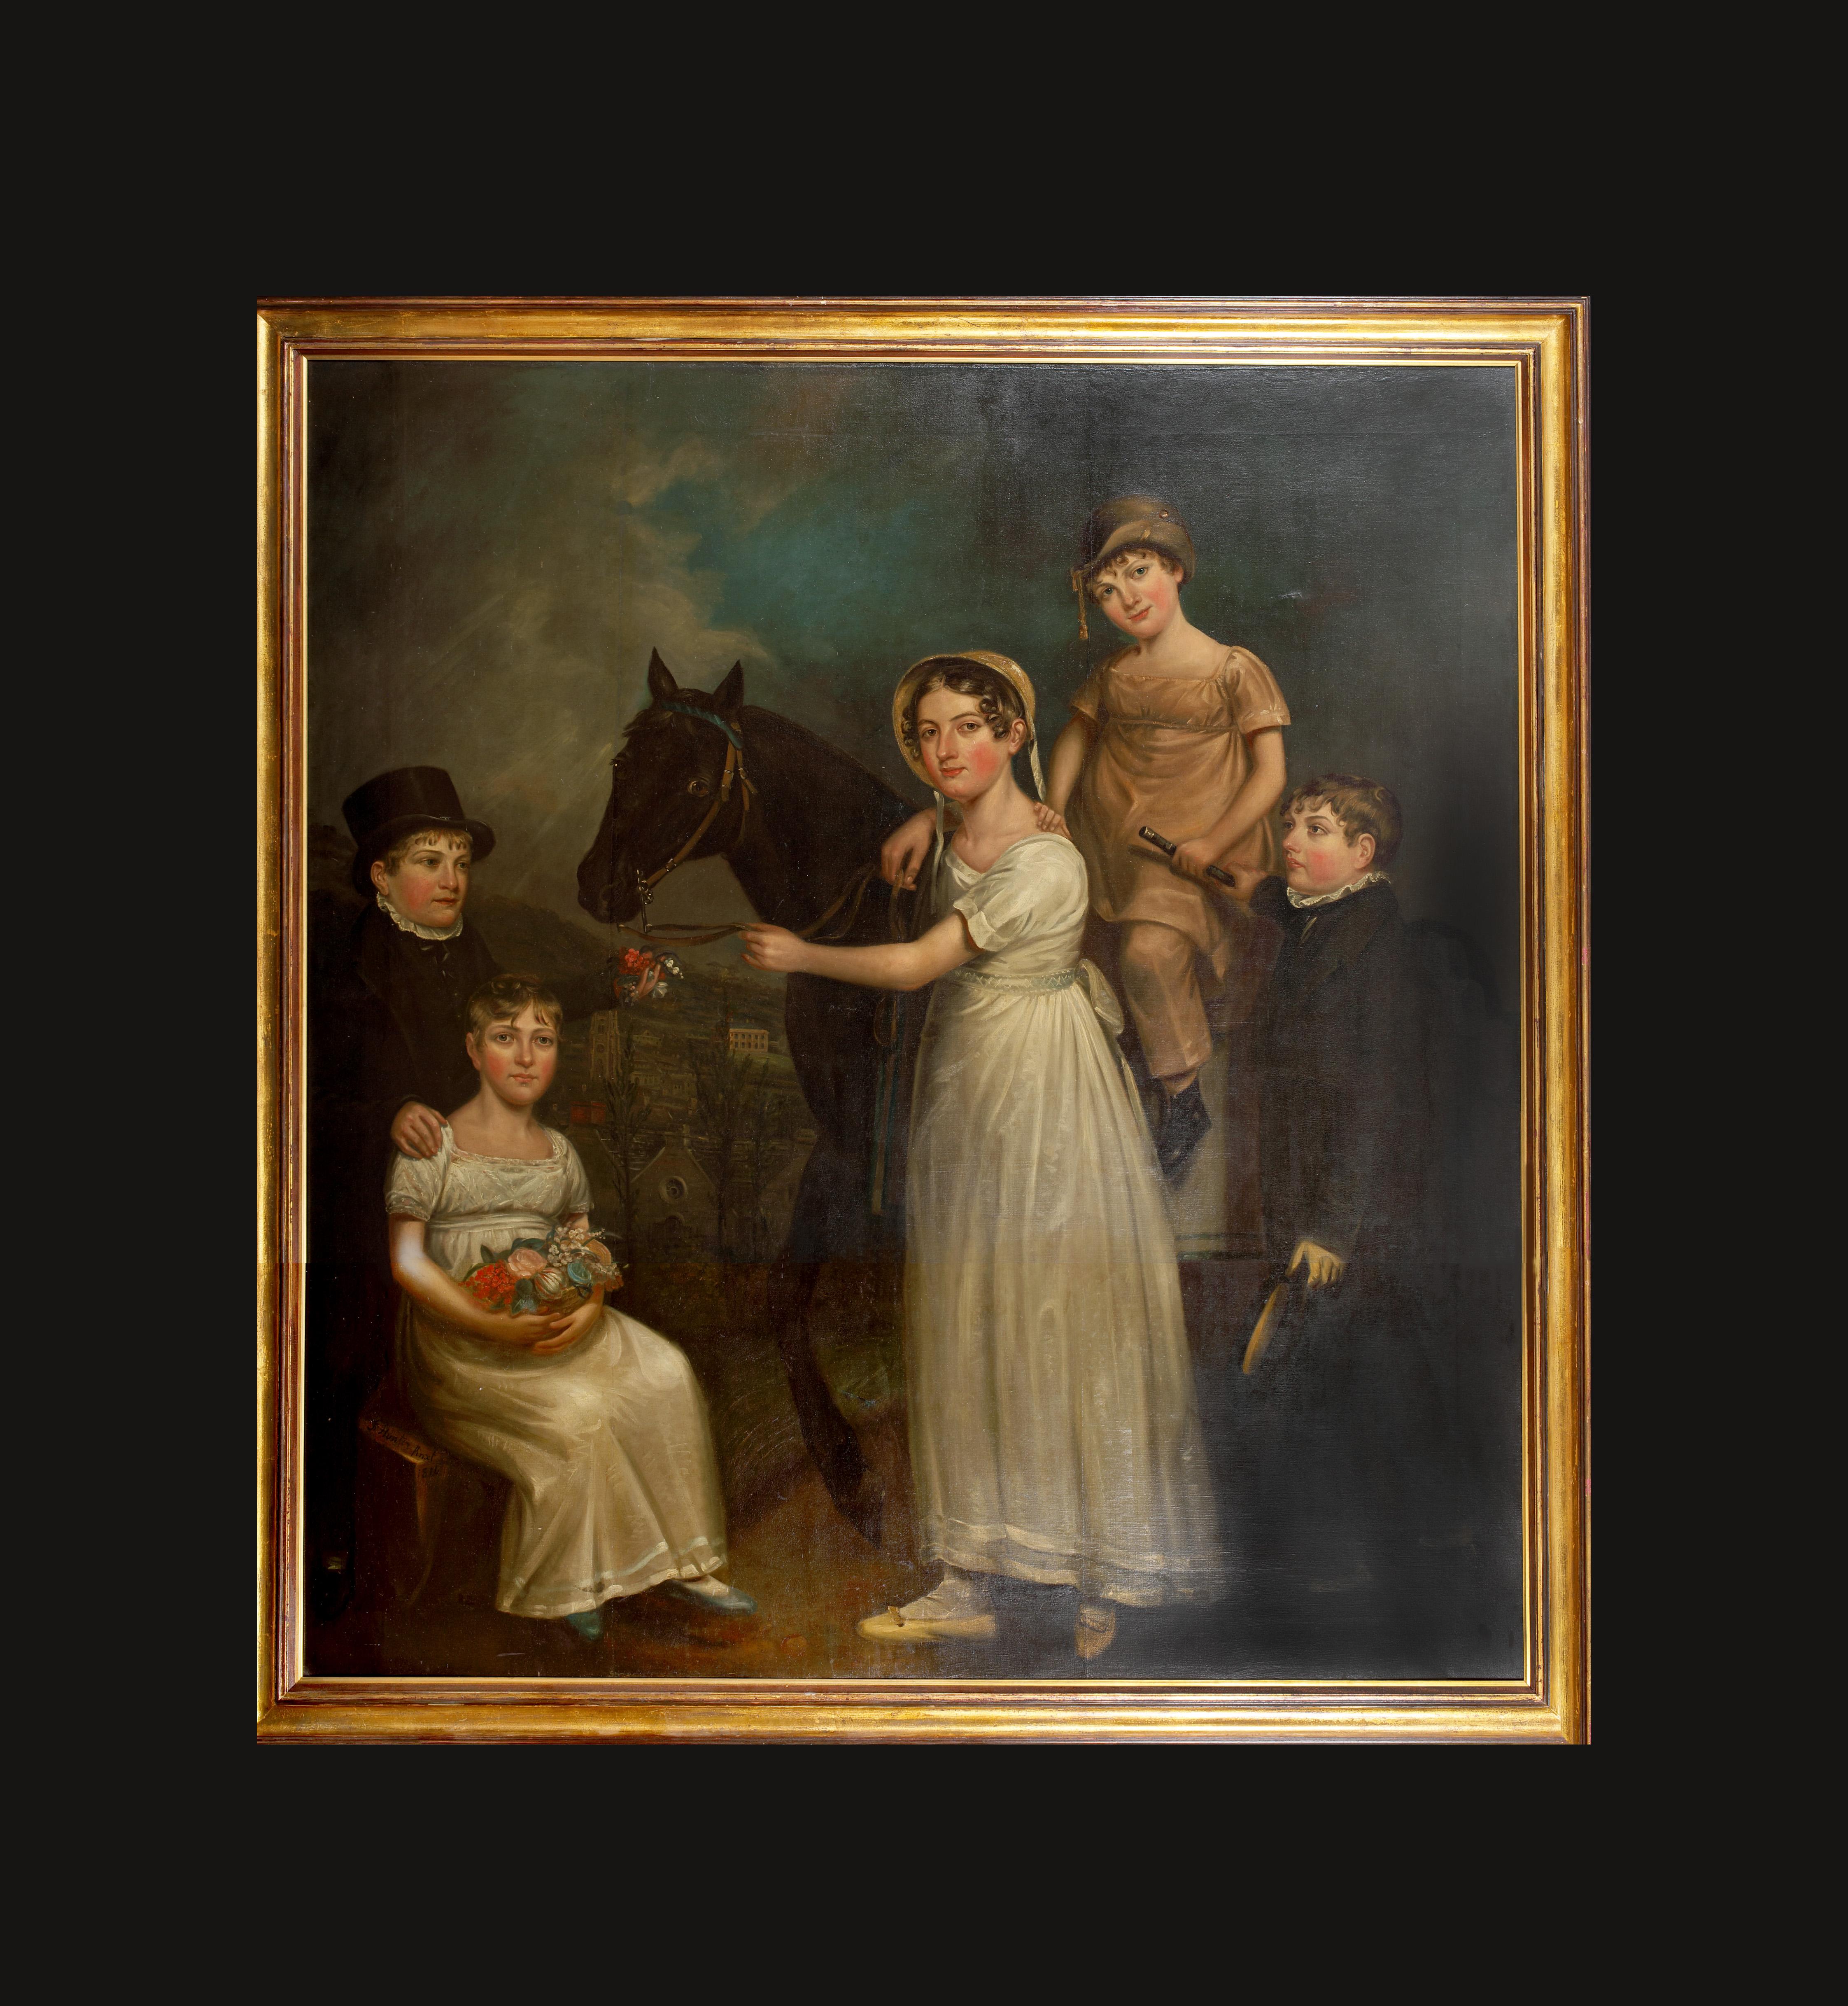 Portrait Of The Fawcett Children Of Bradford, dated 1814  by J. Hunter  - Painting by Unknown